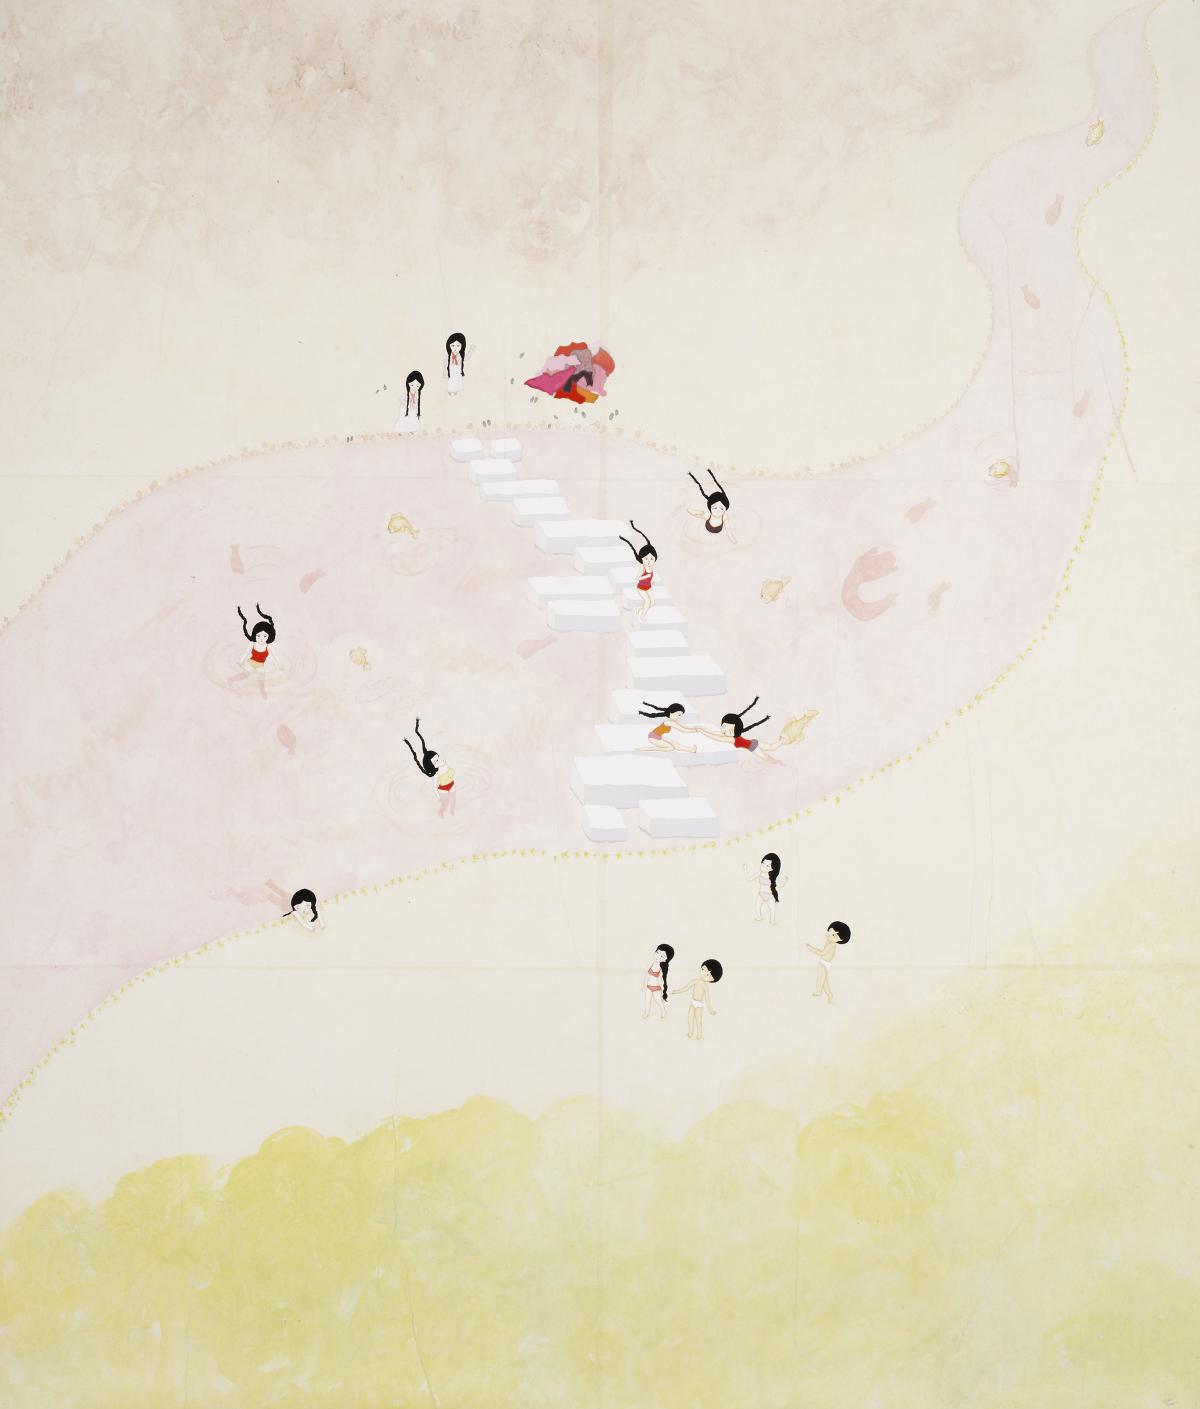 Artwork by Kyung Jeon titled Crossing, 2005, Gouache, graphite, watercolor, acrylic ink on rice paper on canvas, 70 x 59.5 inches, 177.8 x 151.1 cm